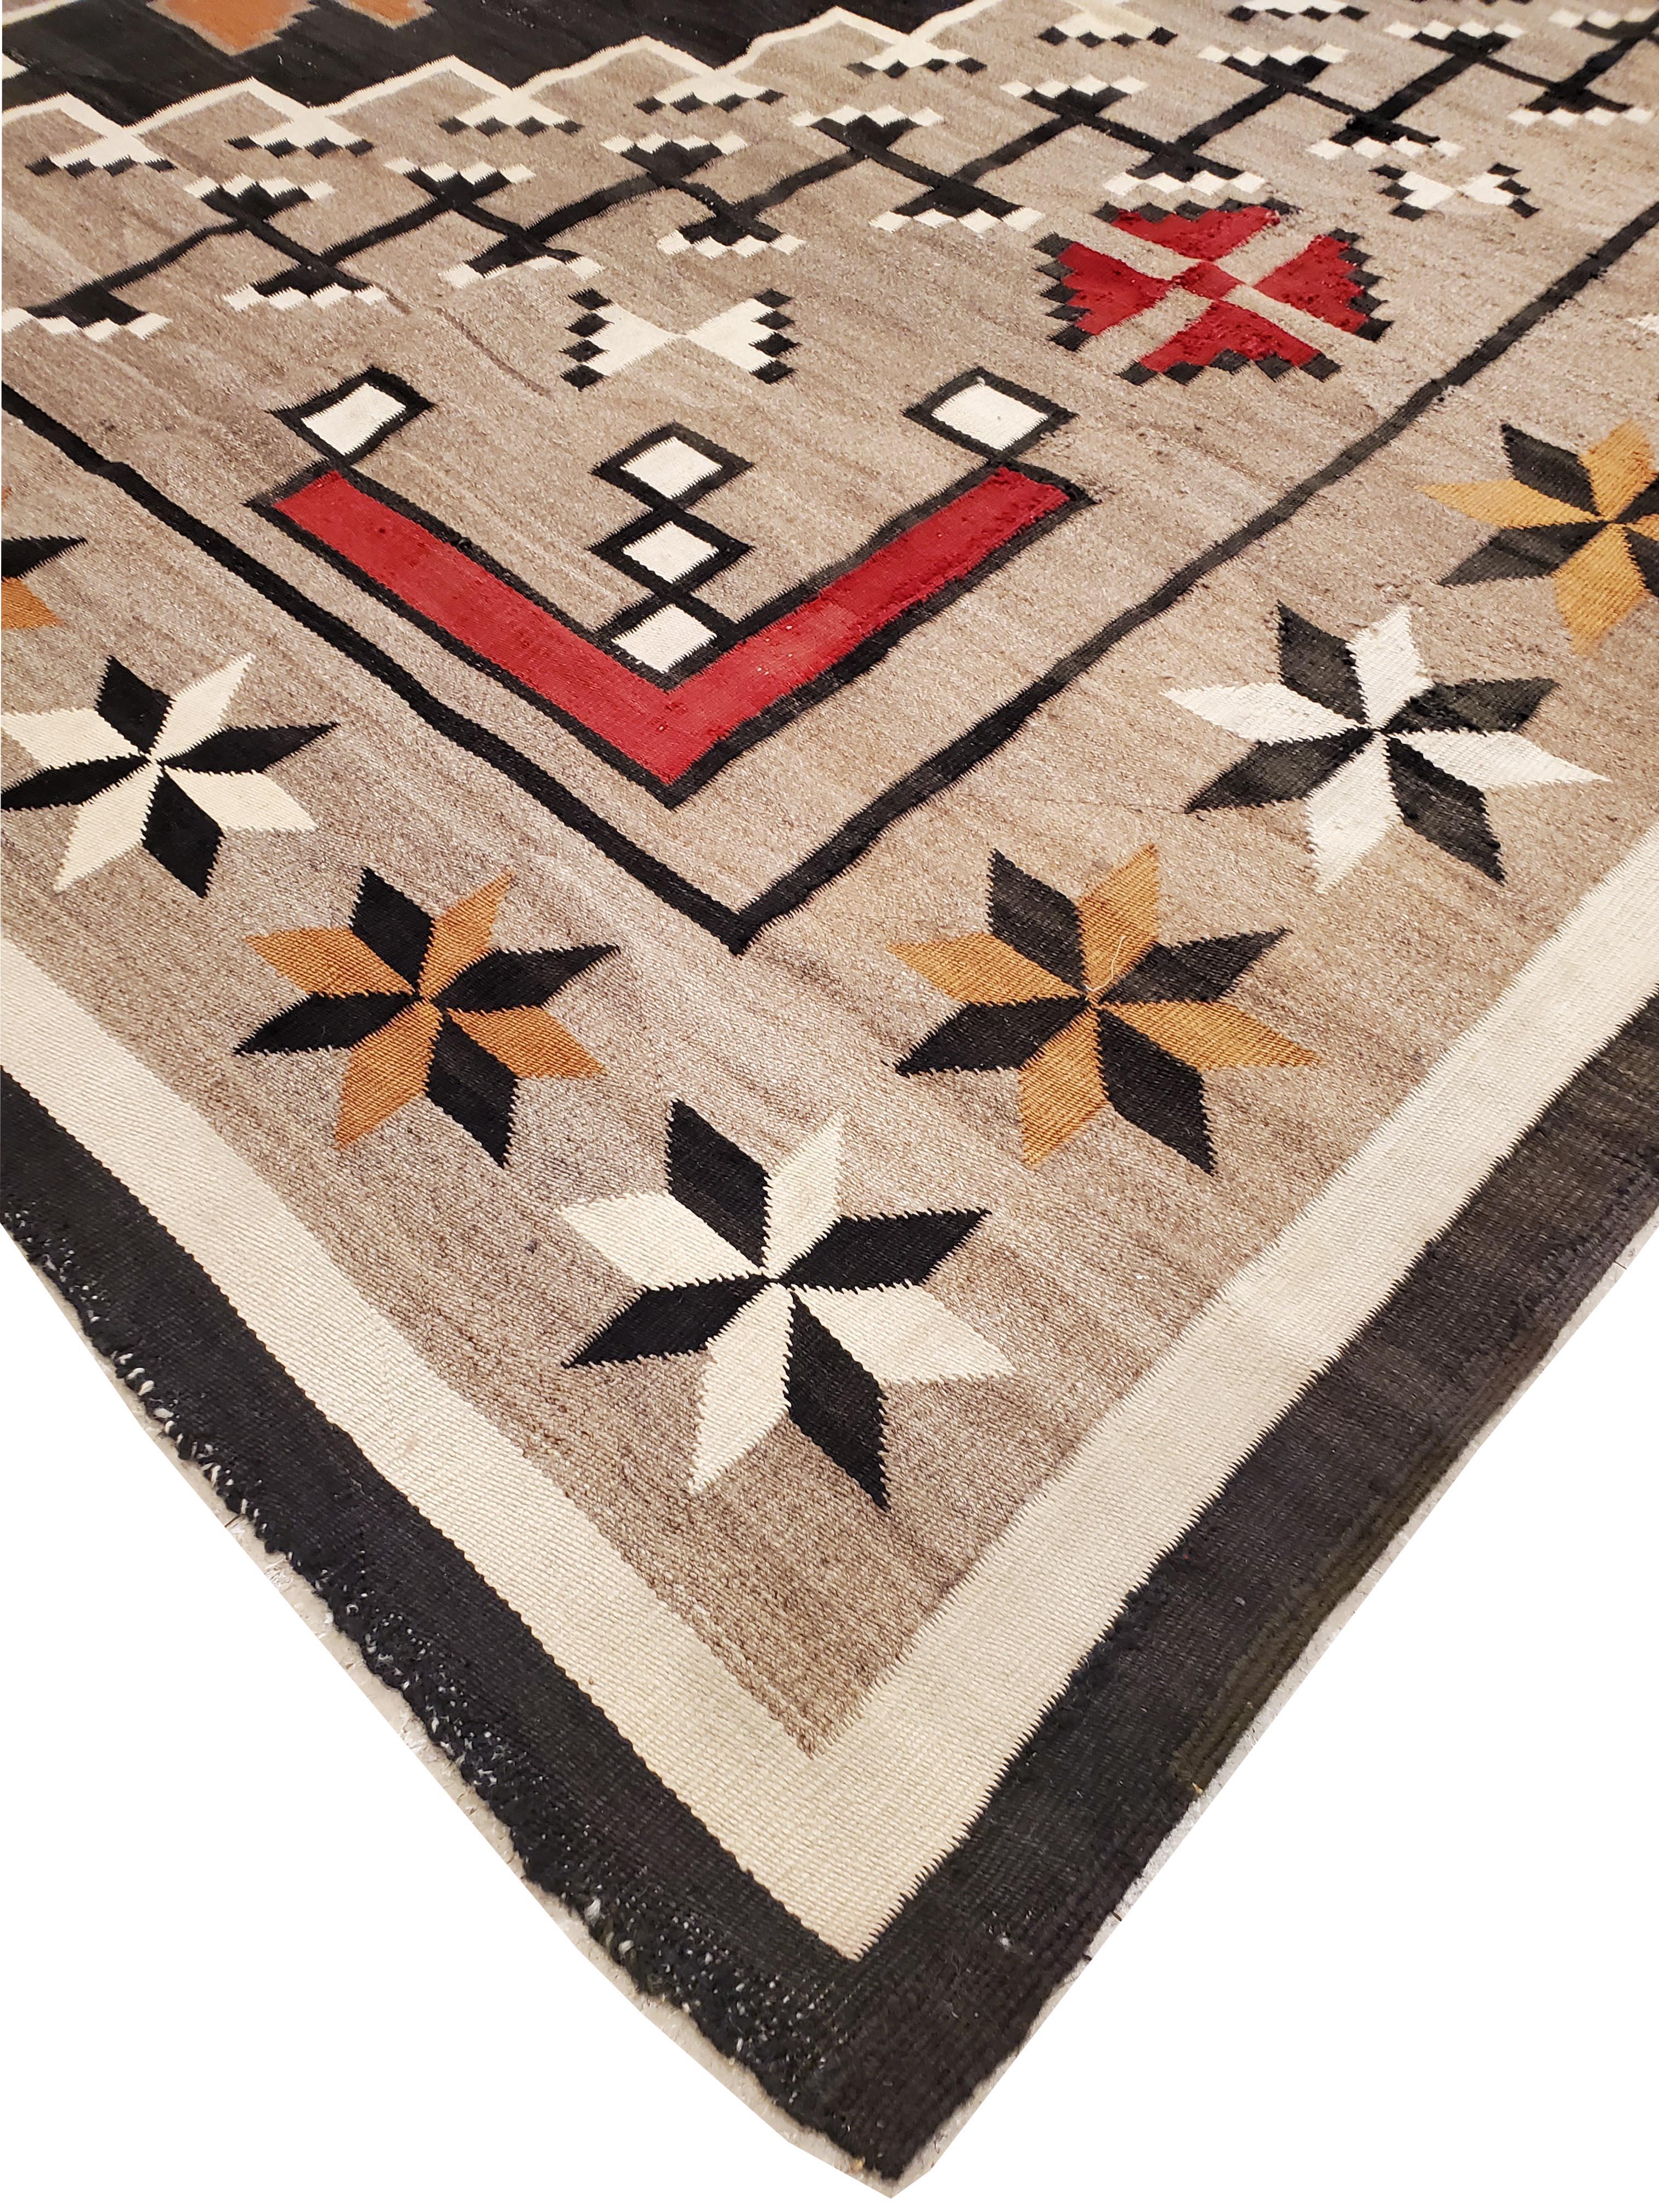 Large Antique Eye Dazzler Navajo Carpet, Handmade, Wool, Beige, Tan, Gray & Red In Good Condition For Sale In Port Washington, NY